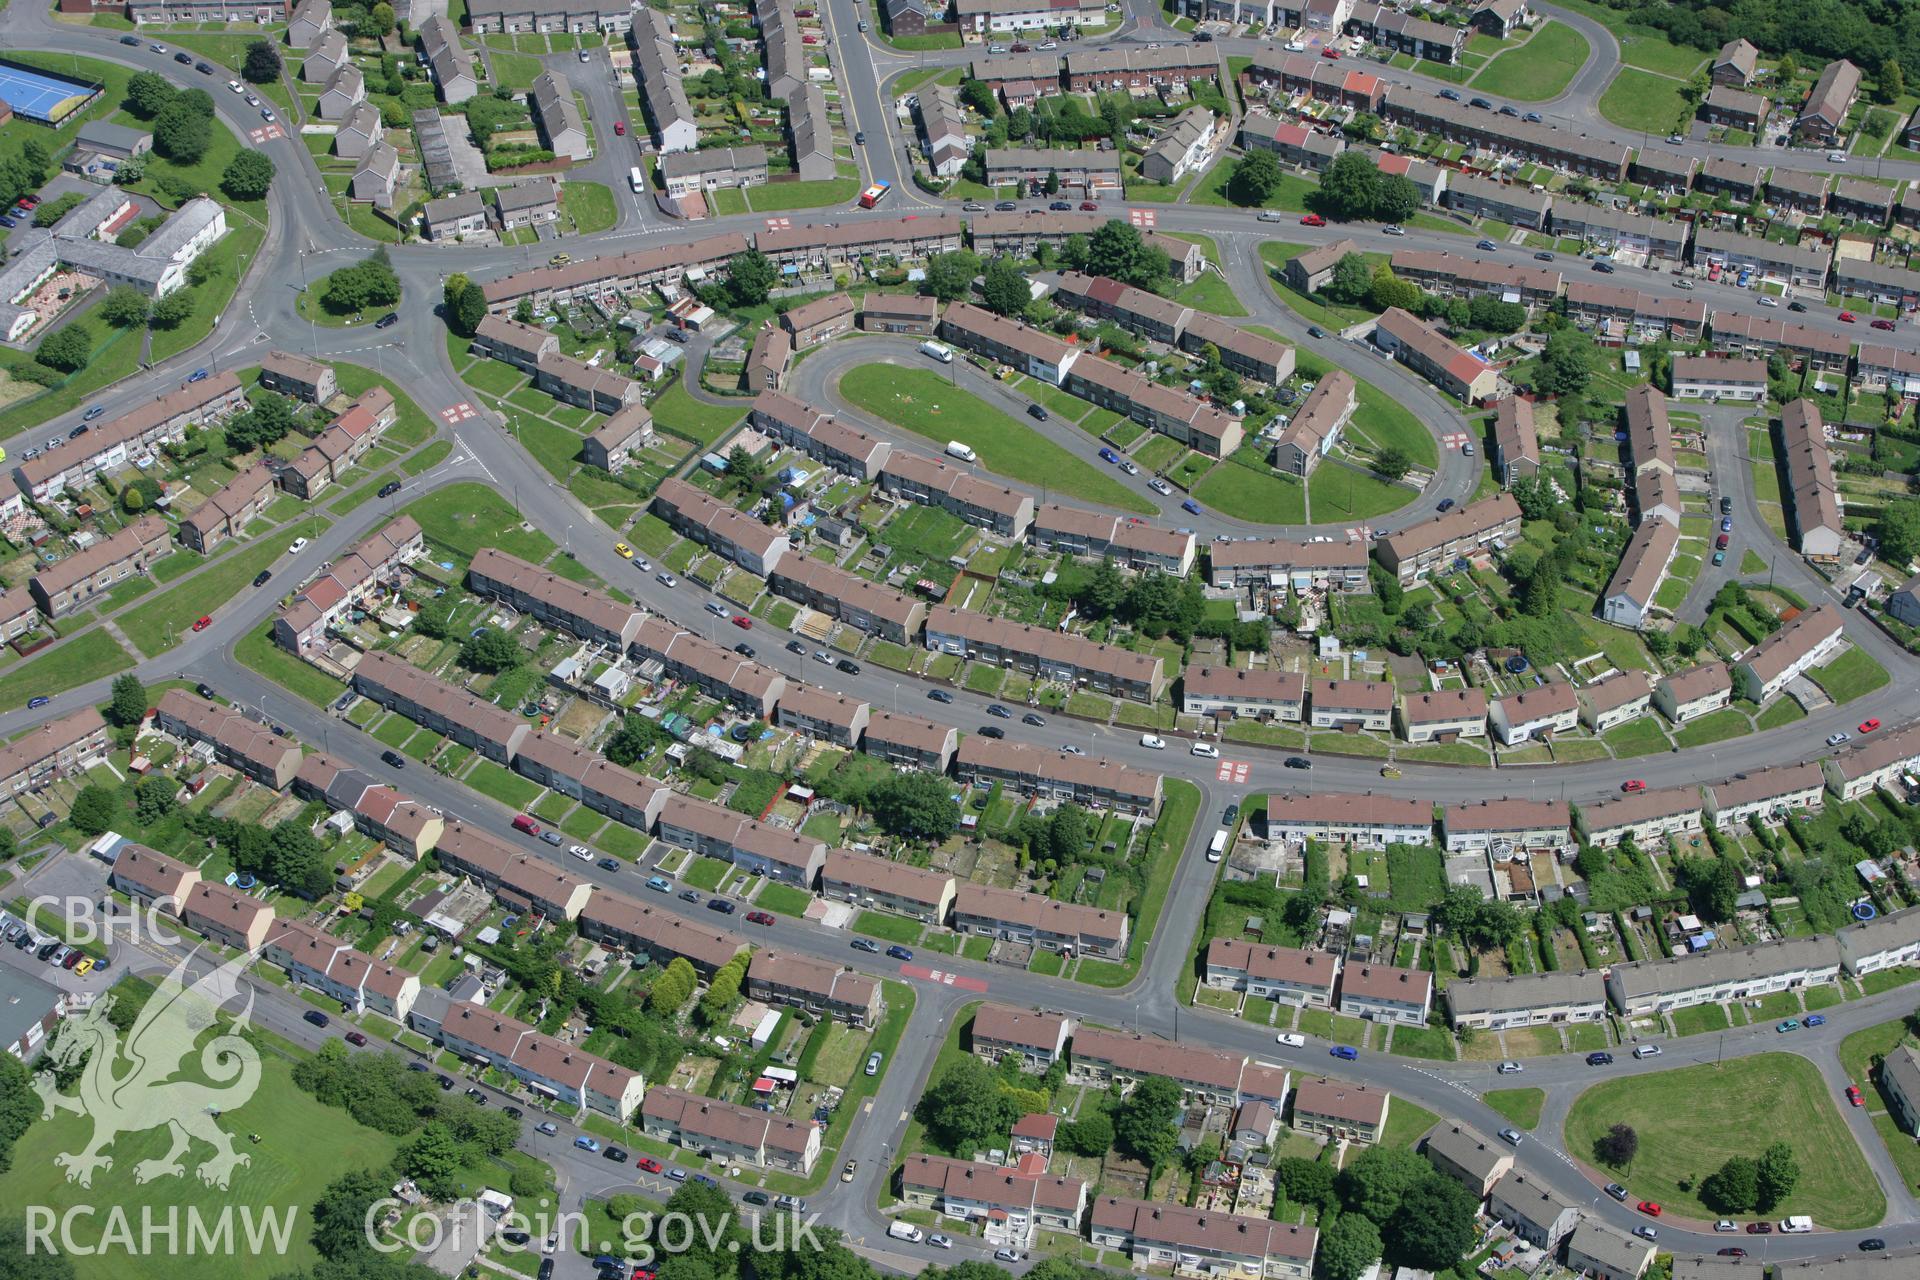 RCAHMW colour oblique photograph of housing at Penydarren, Merthyr Tydfil. Taken by Toby Driver on 09/06/2008.